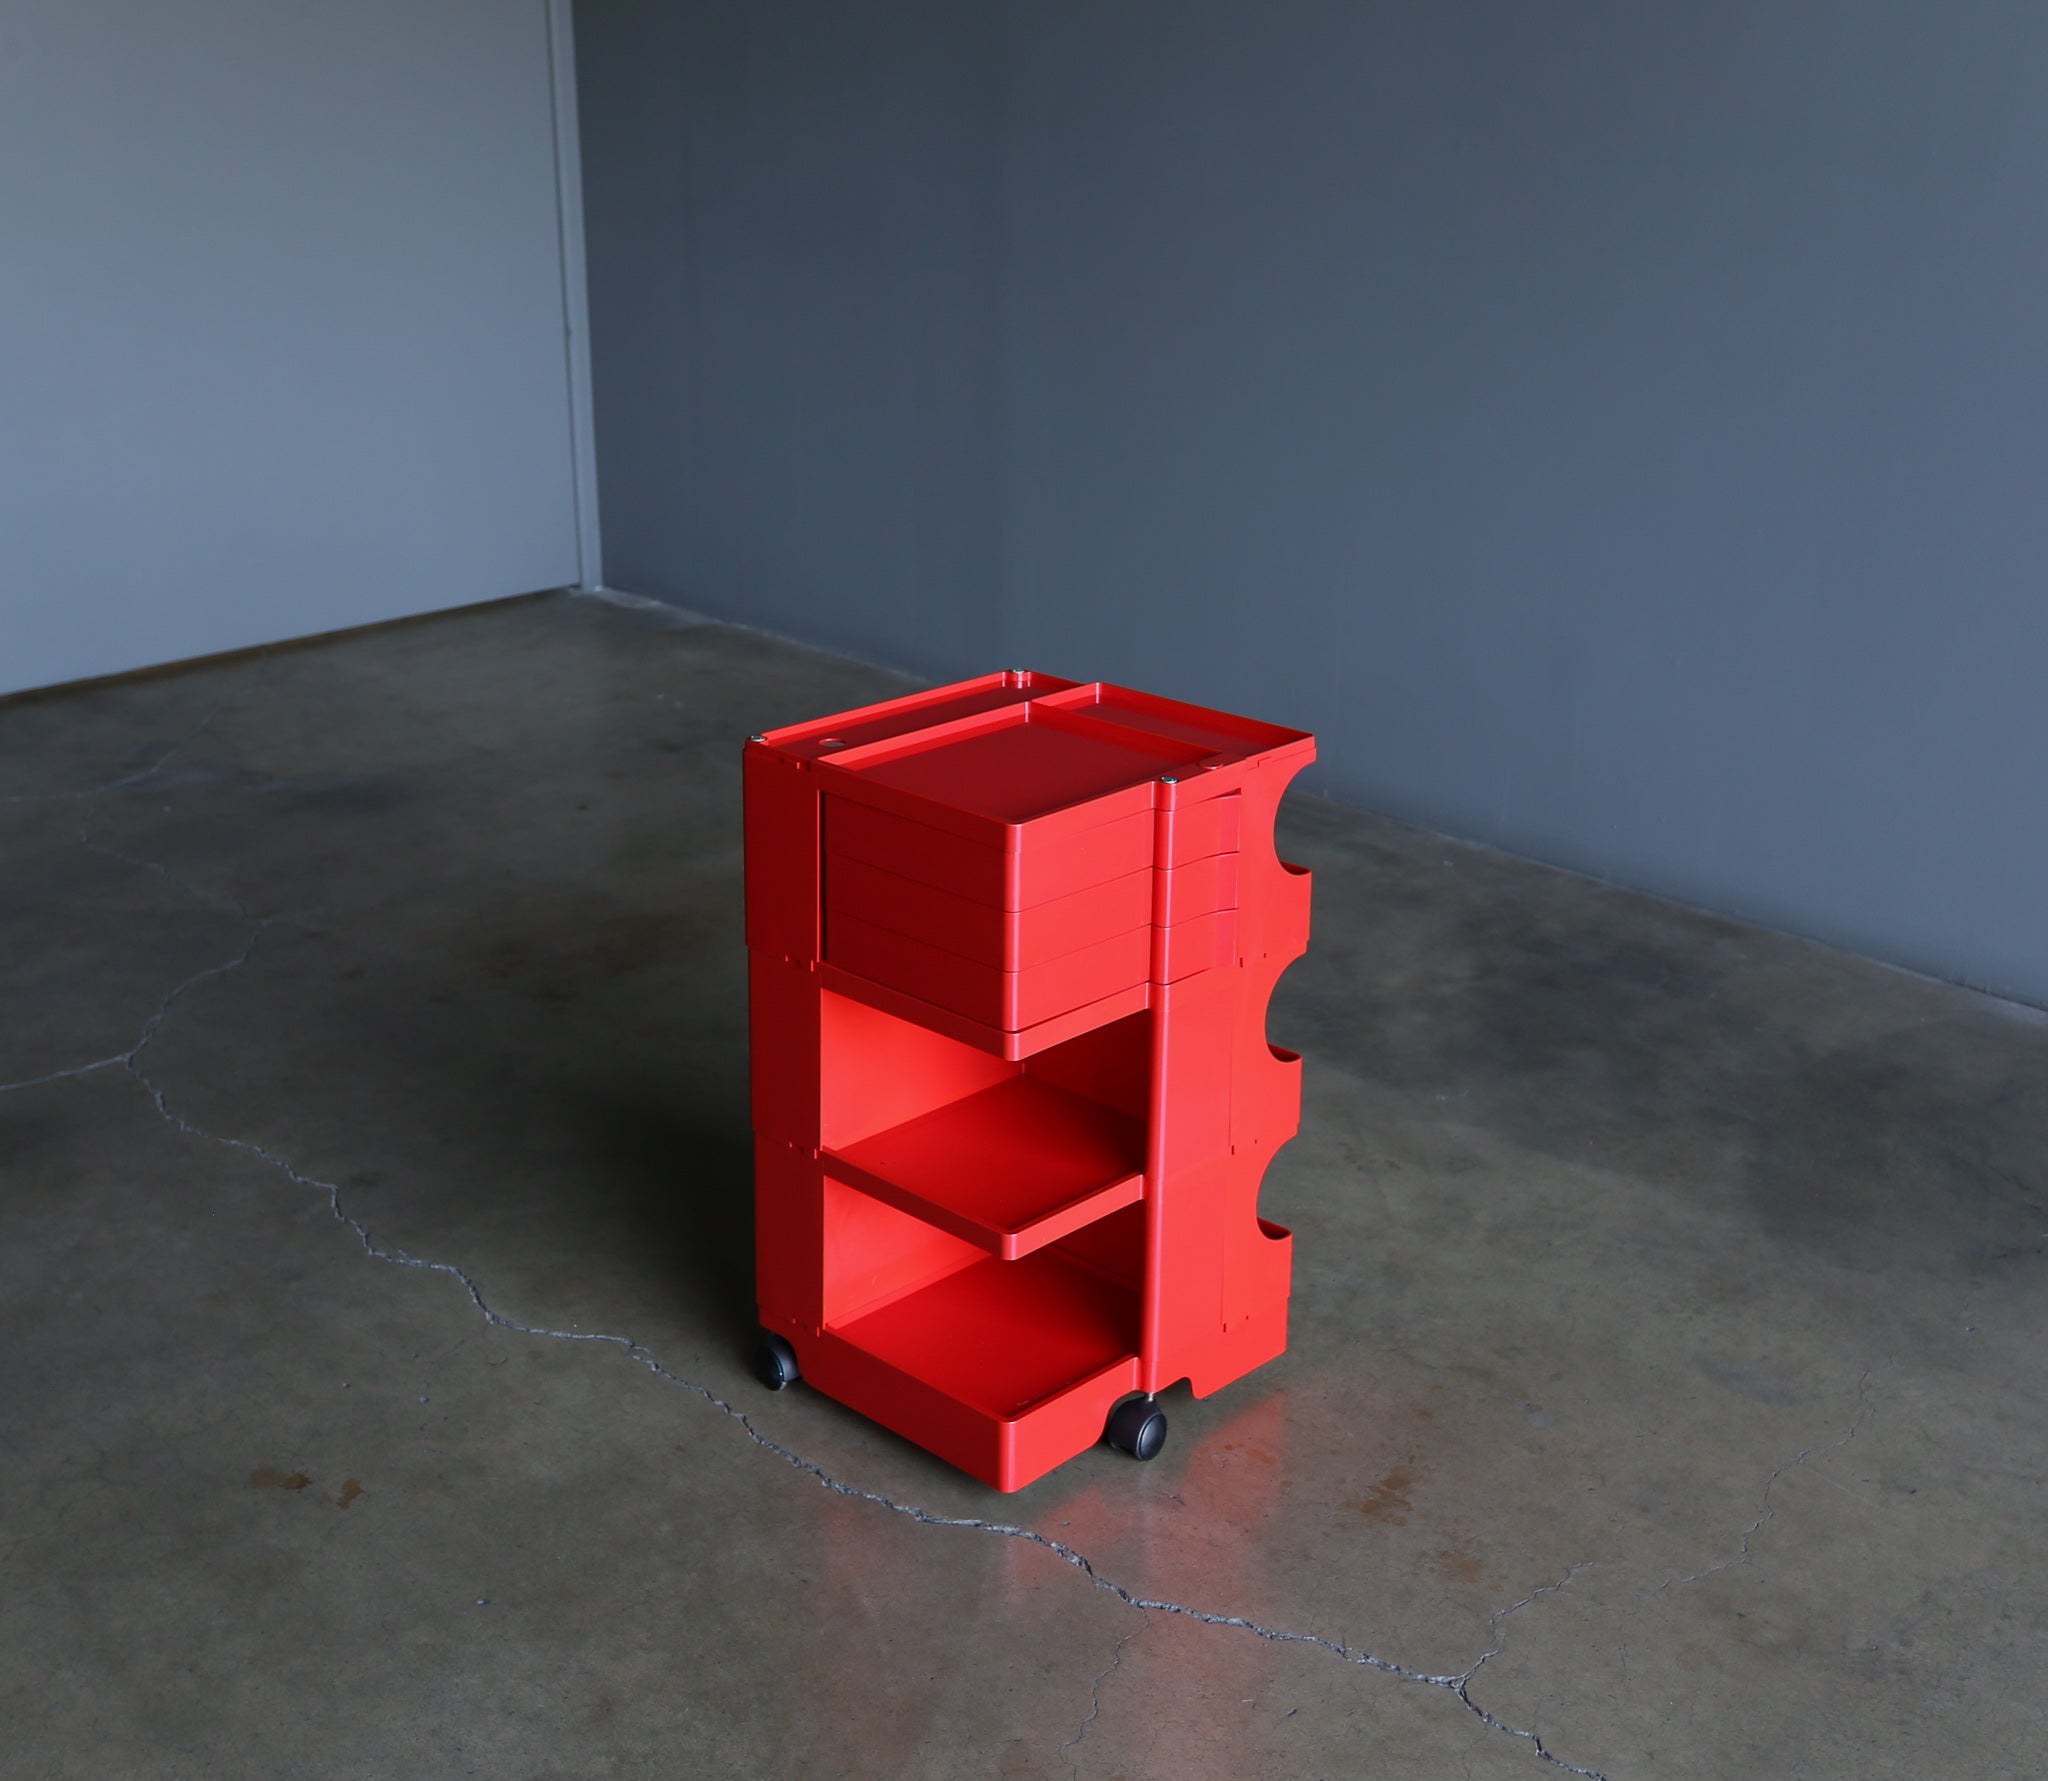 = SOLD = Joe Colombo Red Boby 3 Portable Storage System for Bieffeplast, circa 1969